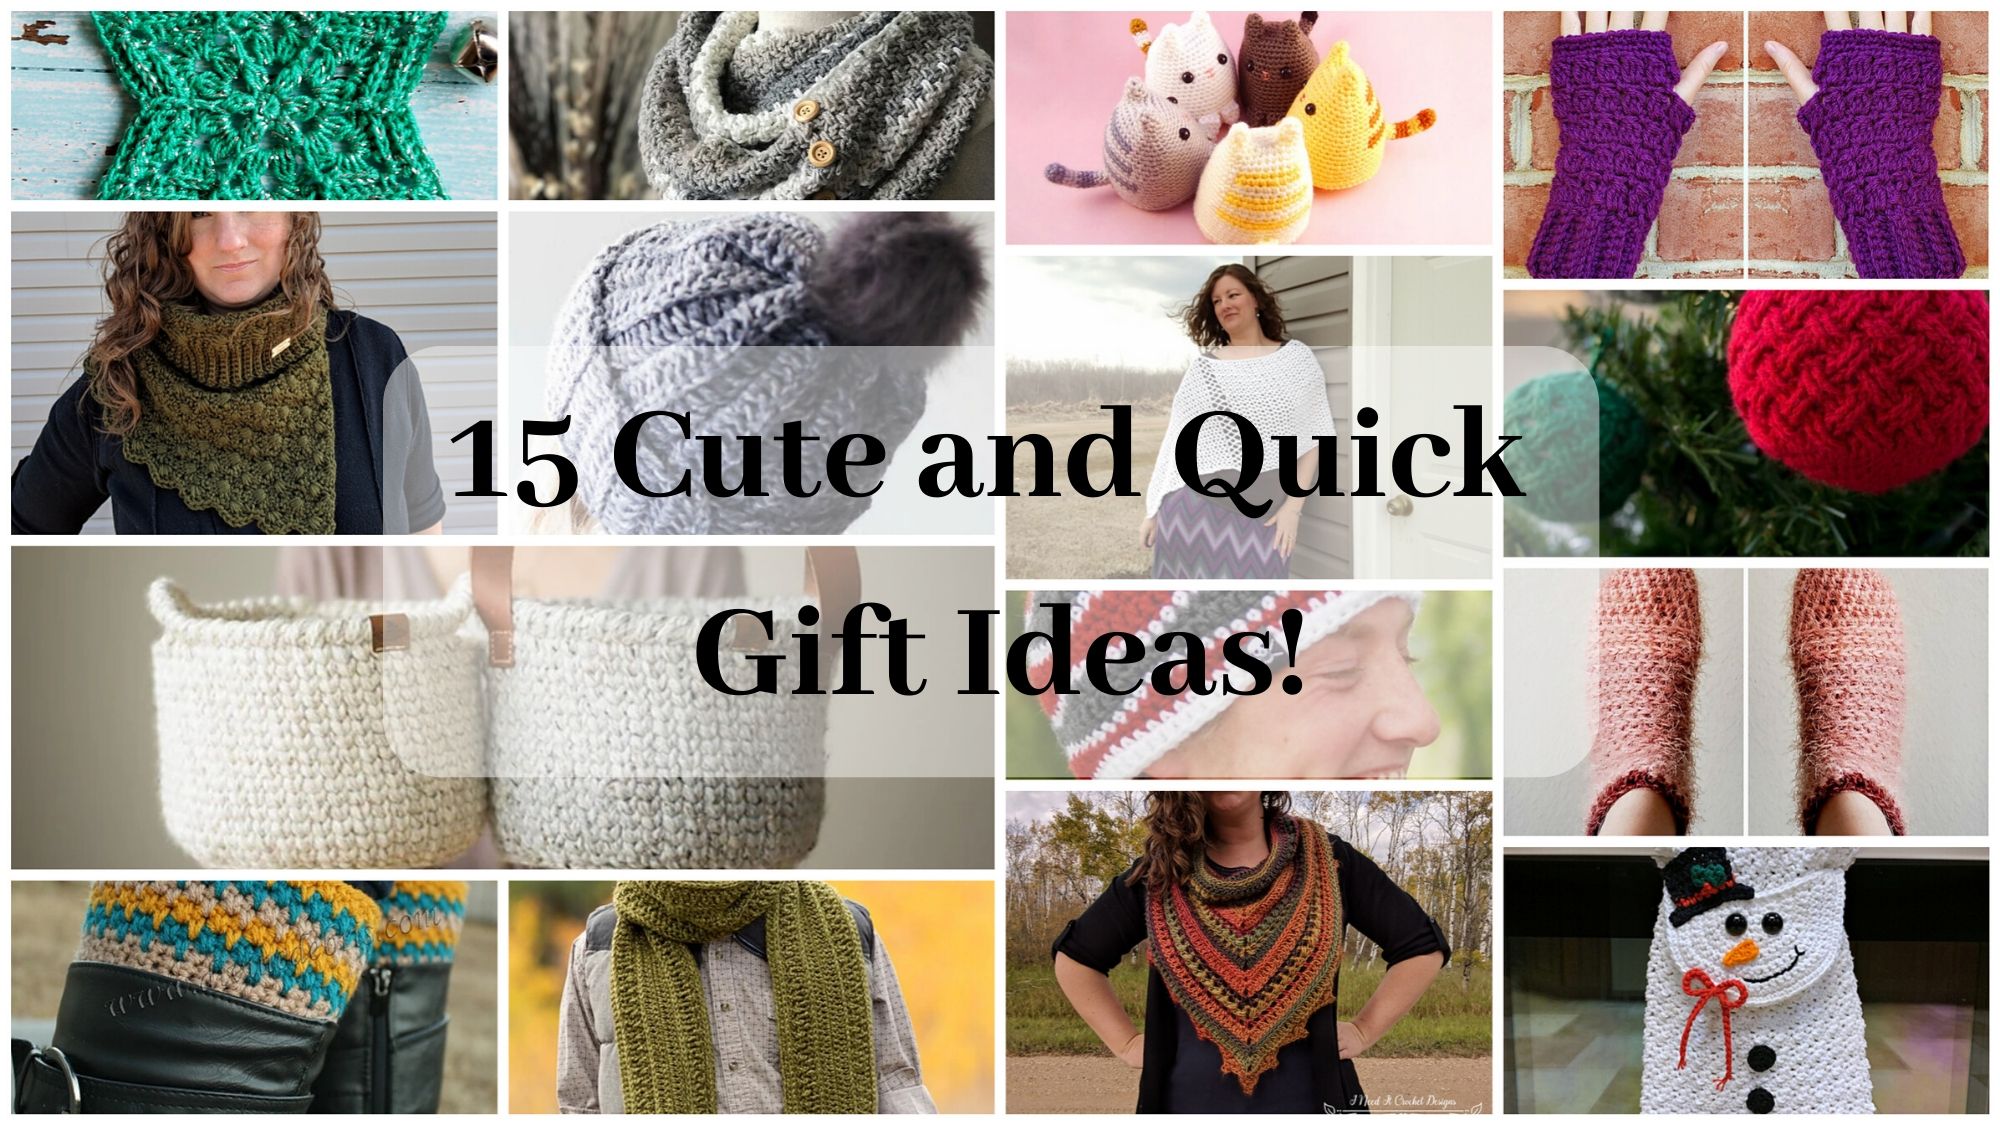 15 Cute and Quick Gift Ideas!